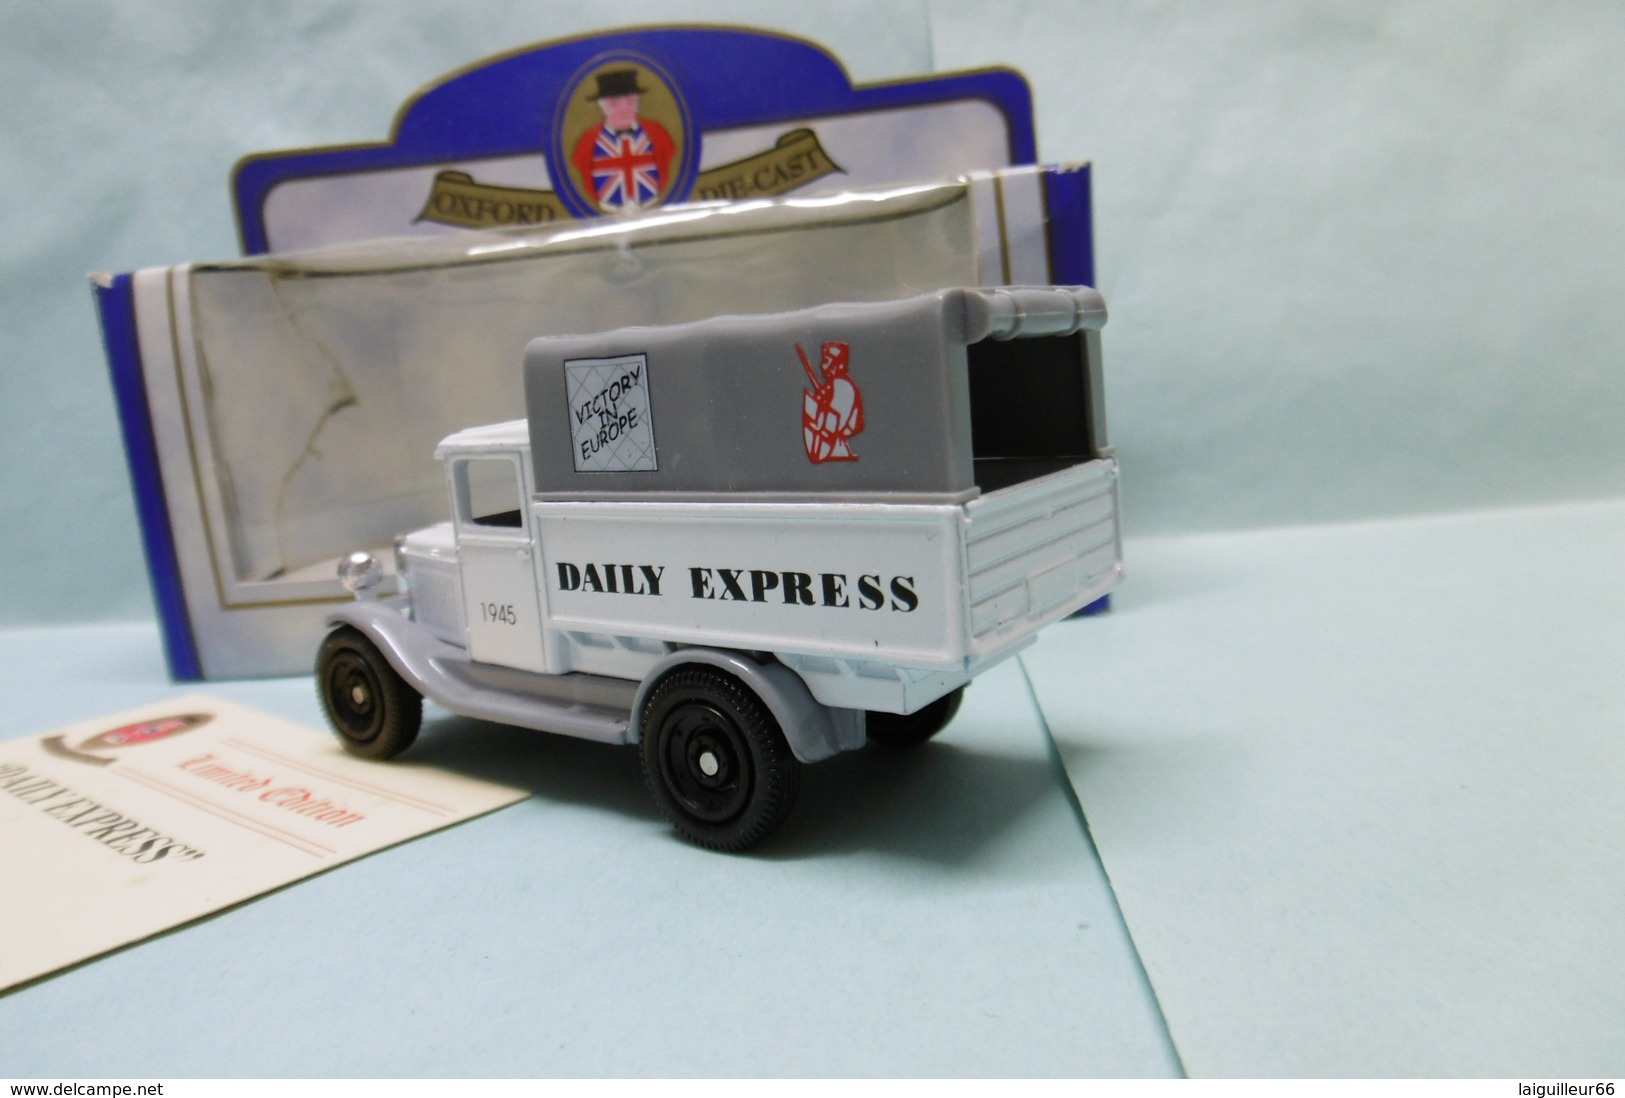 Oxford - CHEVROLET Pick-up DAILY EXPRESS Réf. C020 BO 1/43 - Vrachtwagens